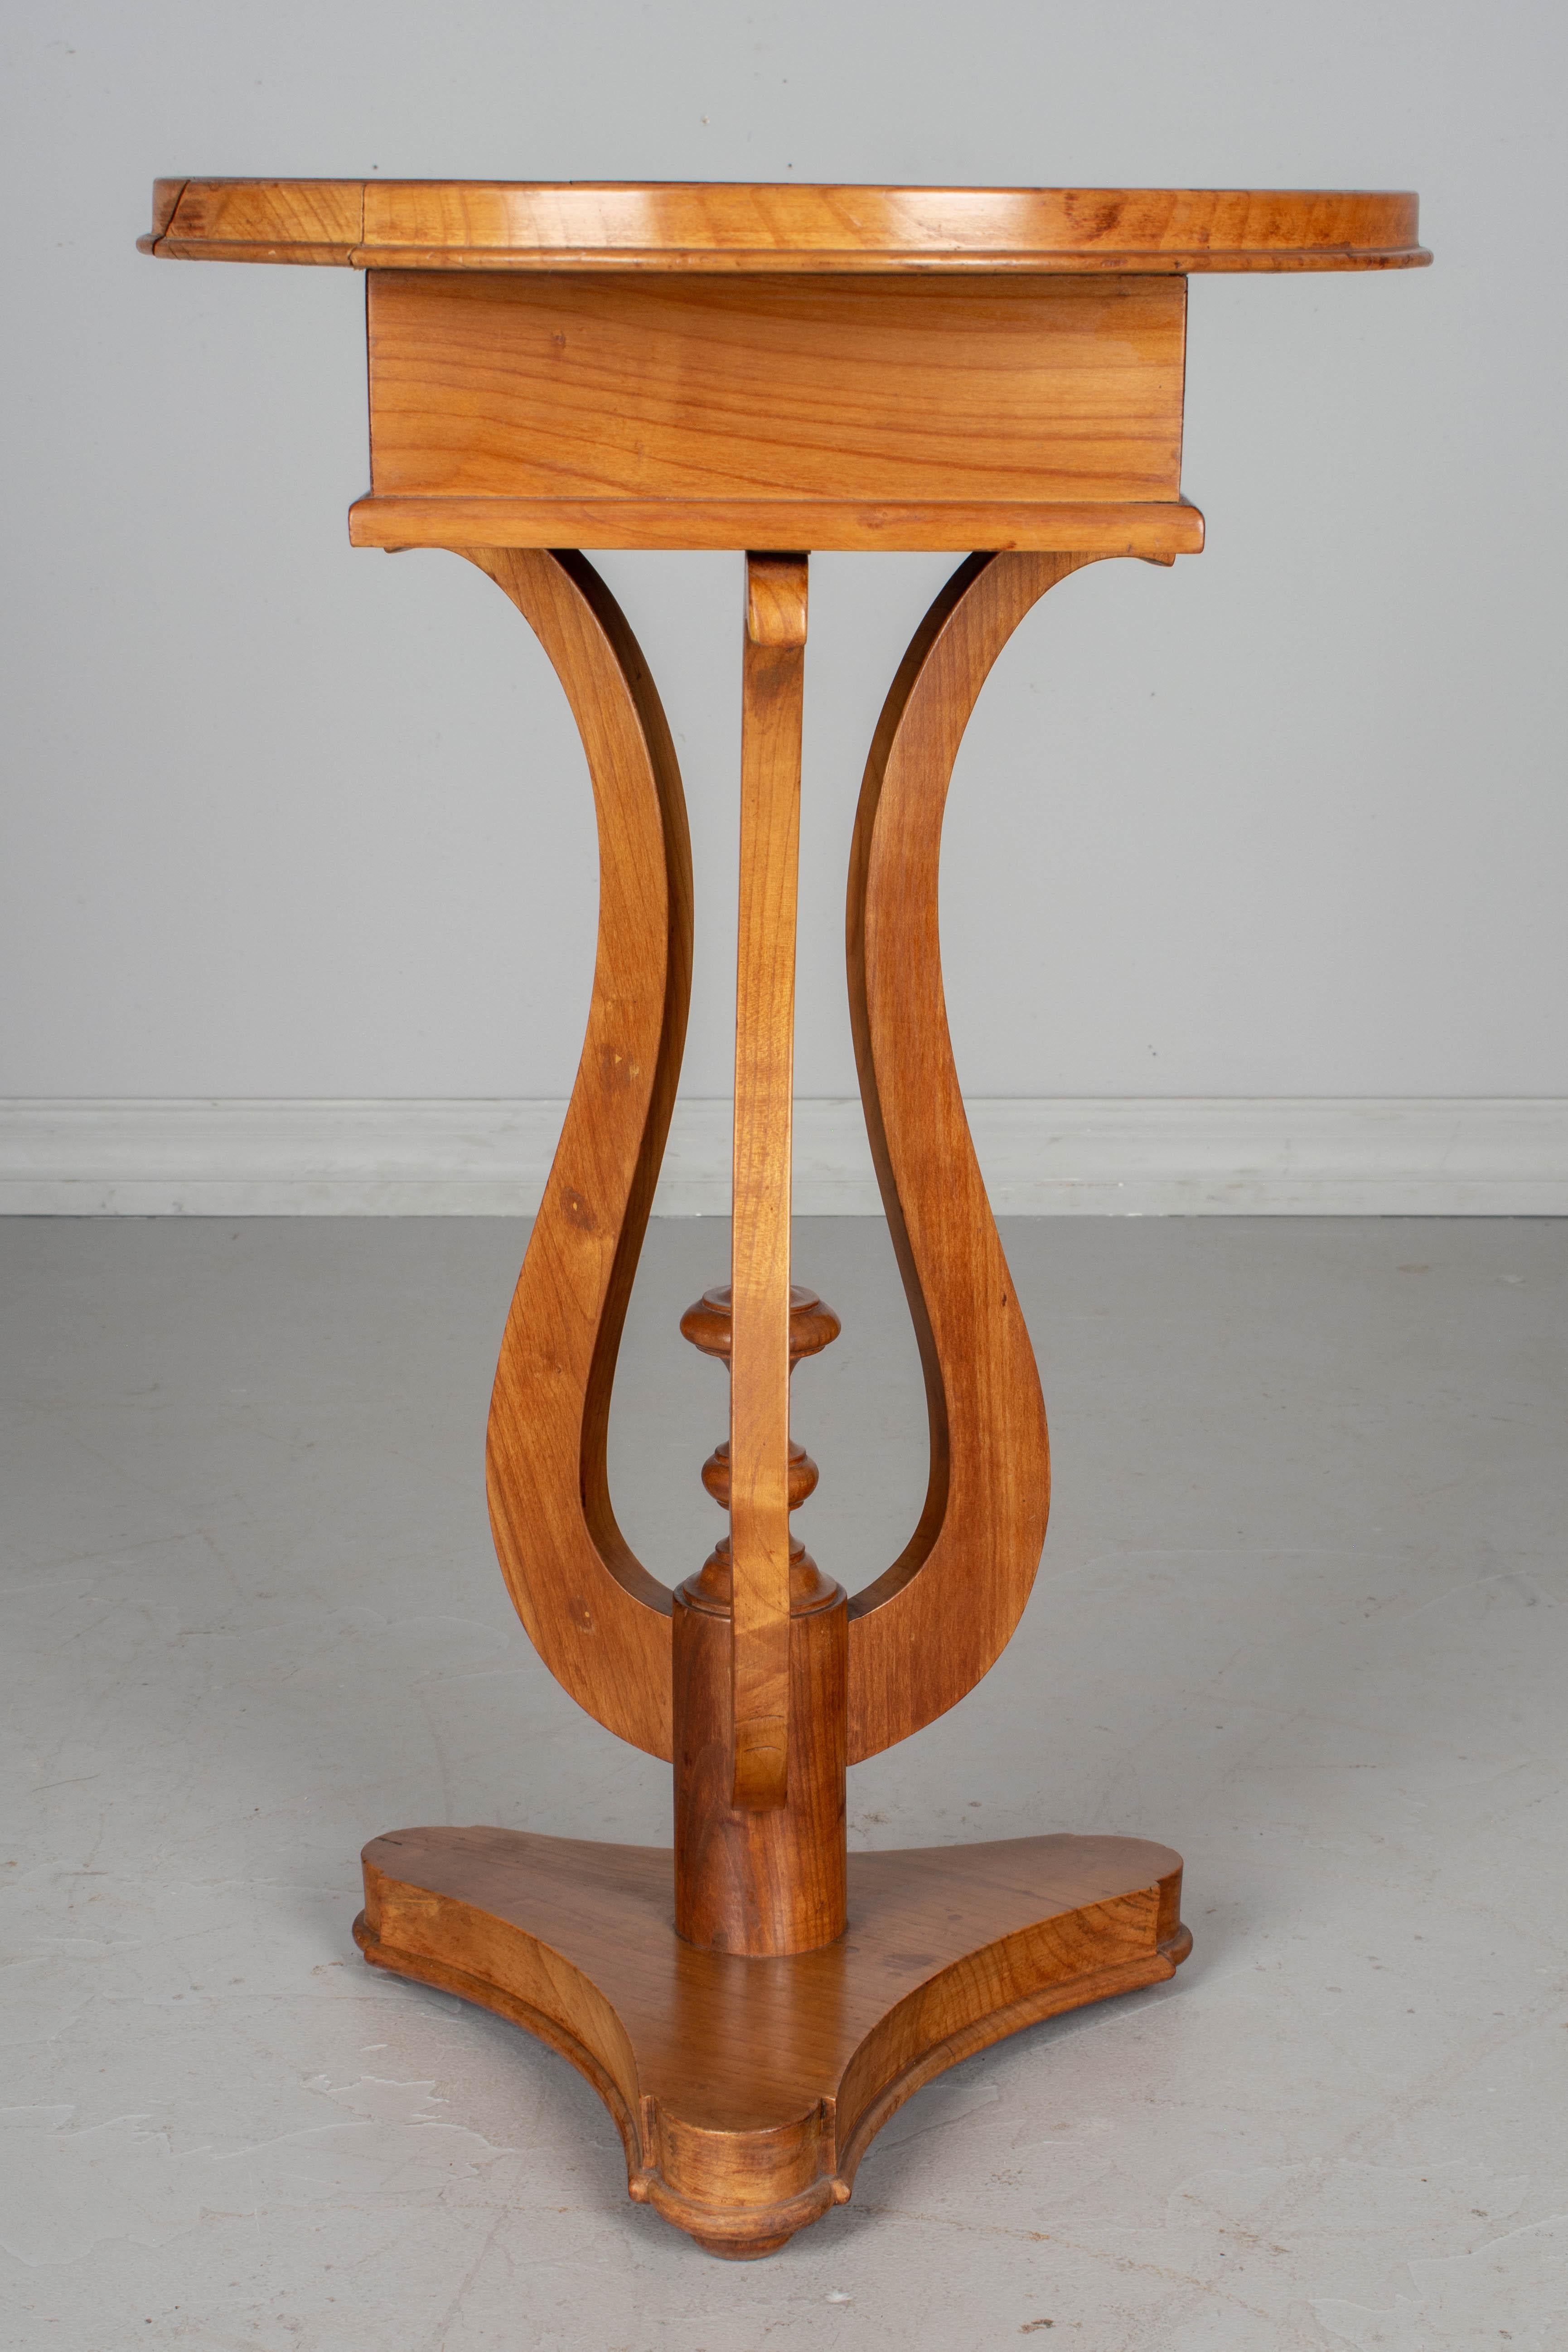 A French Charles X style gueridon made of solid cherrywood. A nice circular accent table with lyre shaped pedestal, turned finial and triangular base. Small dovetailed drawer with brass knob. Please refer to photos for more details.
  